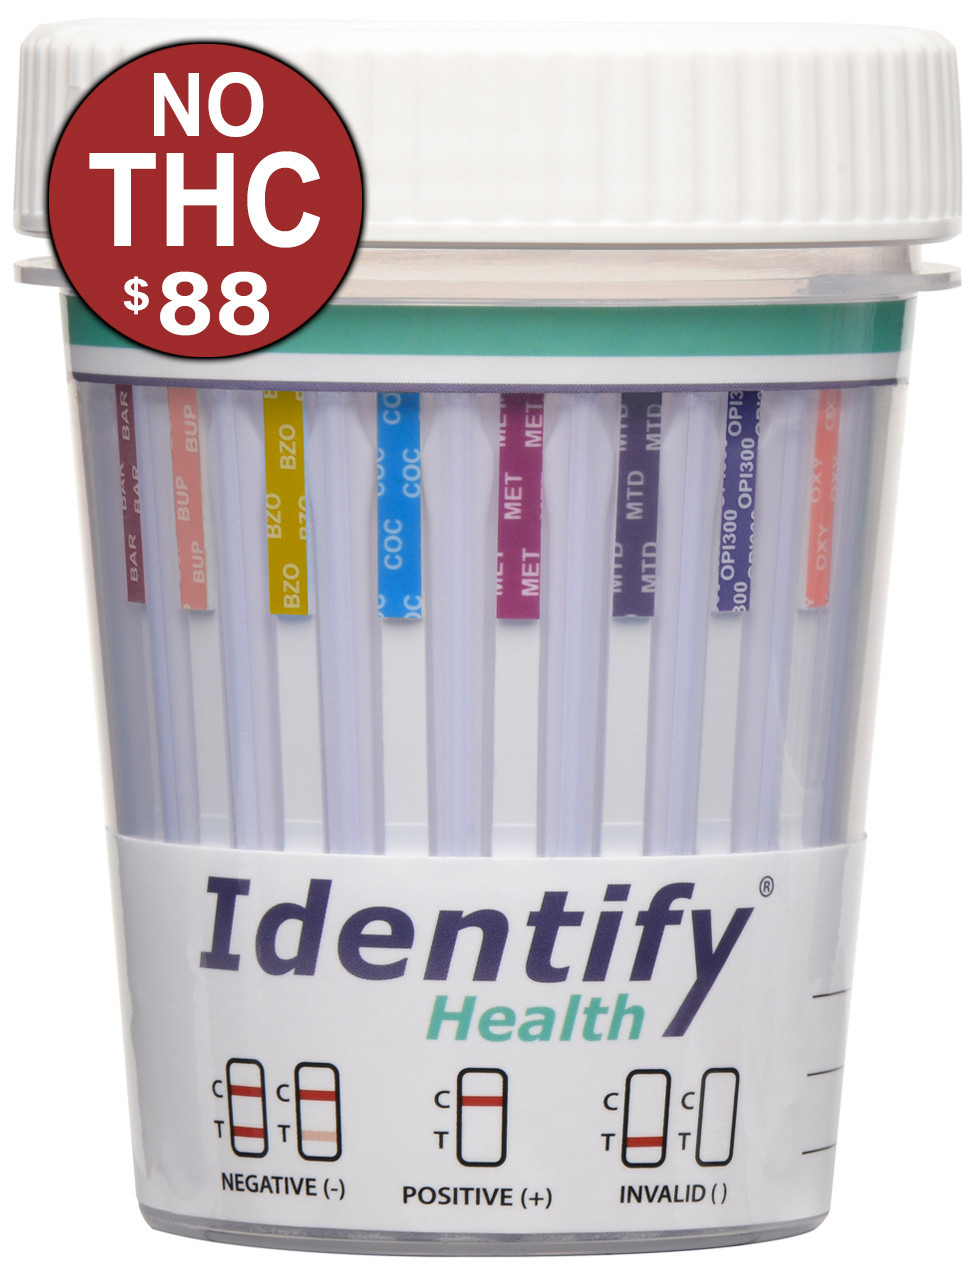 9 Panel Drug Test Cup with no THC - Identify Health CLIA Waived